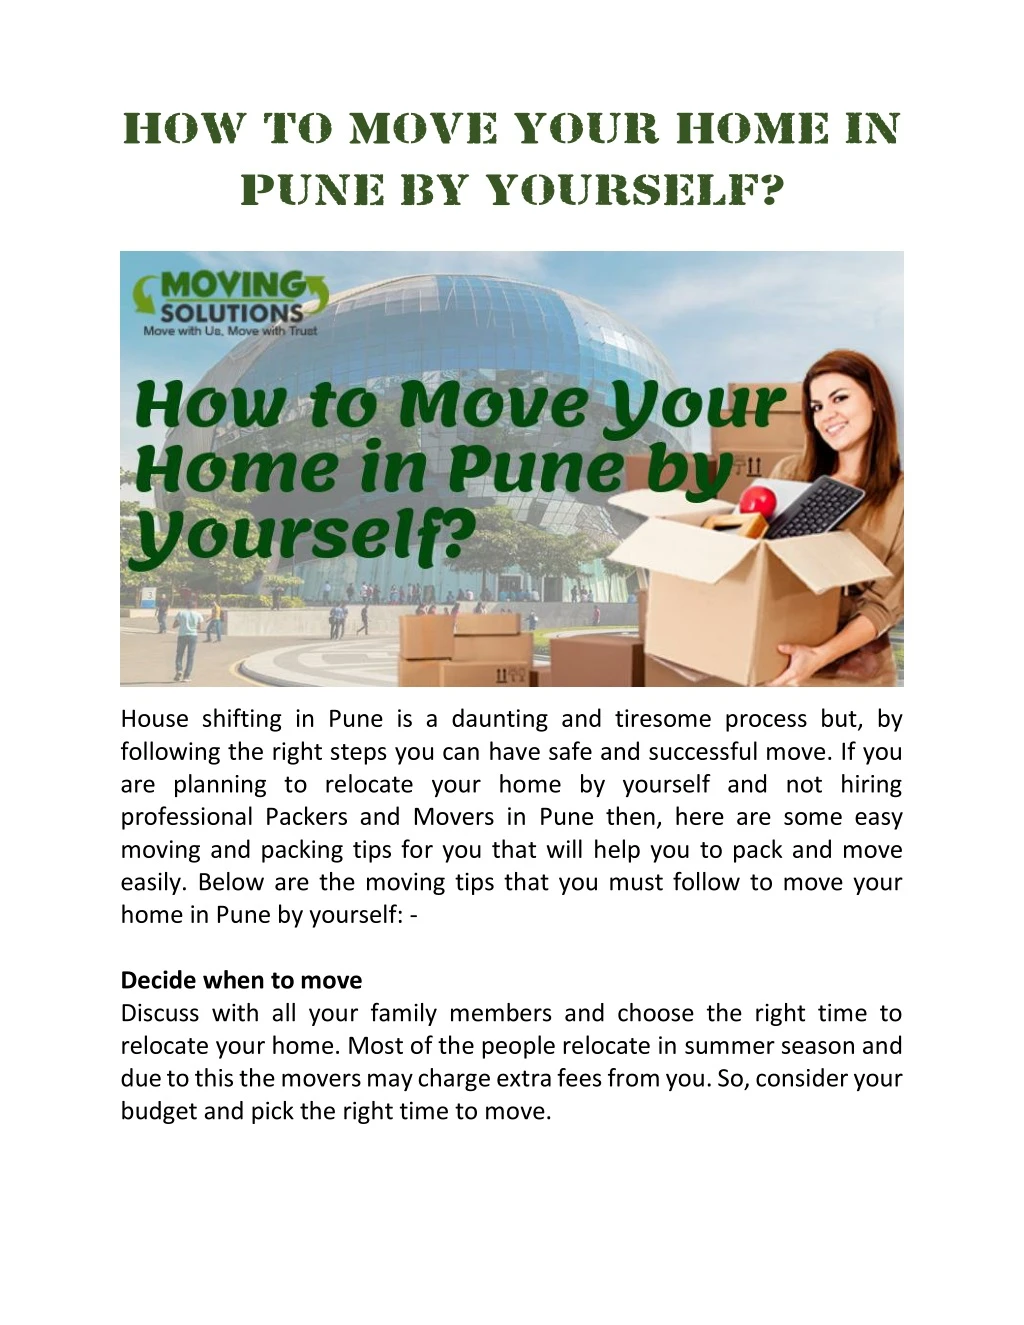 how to move your home in